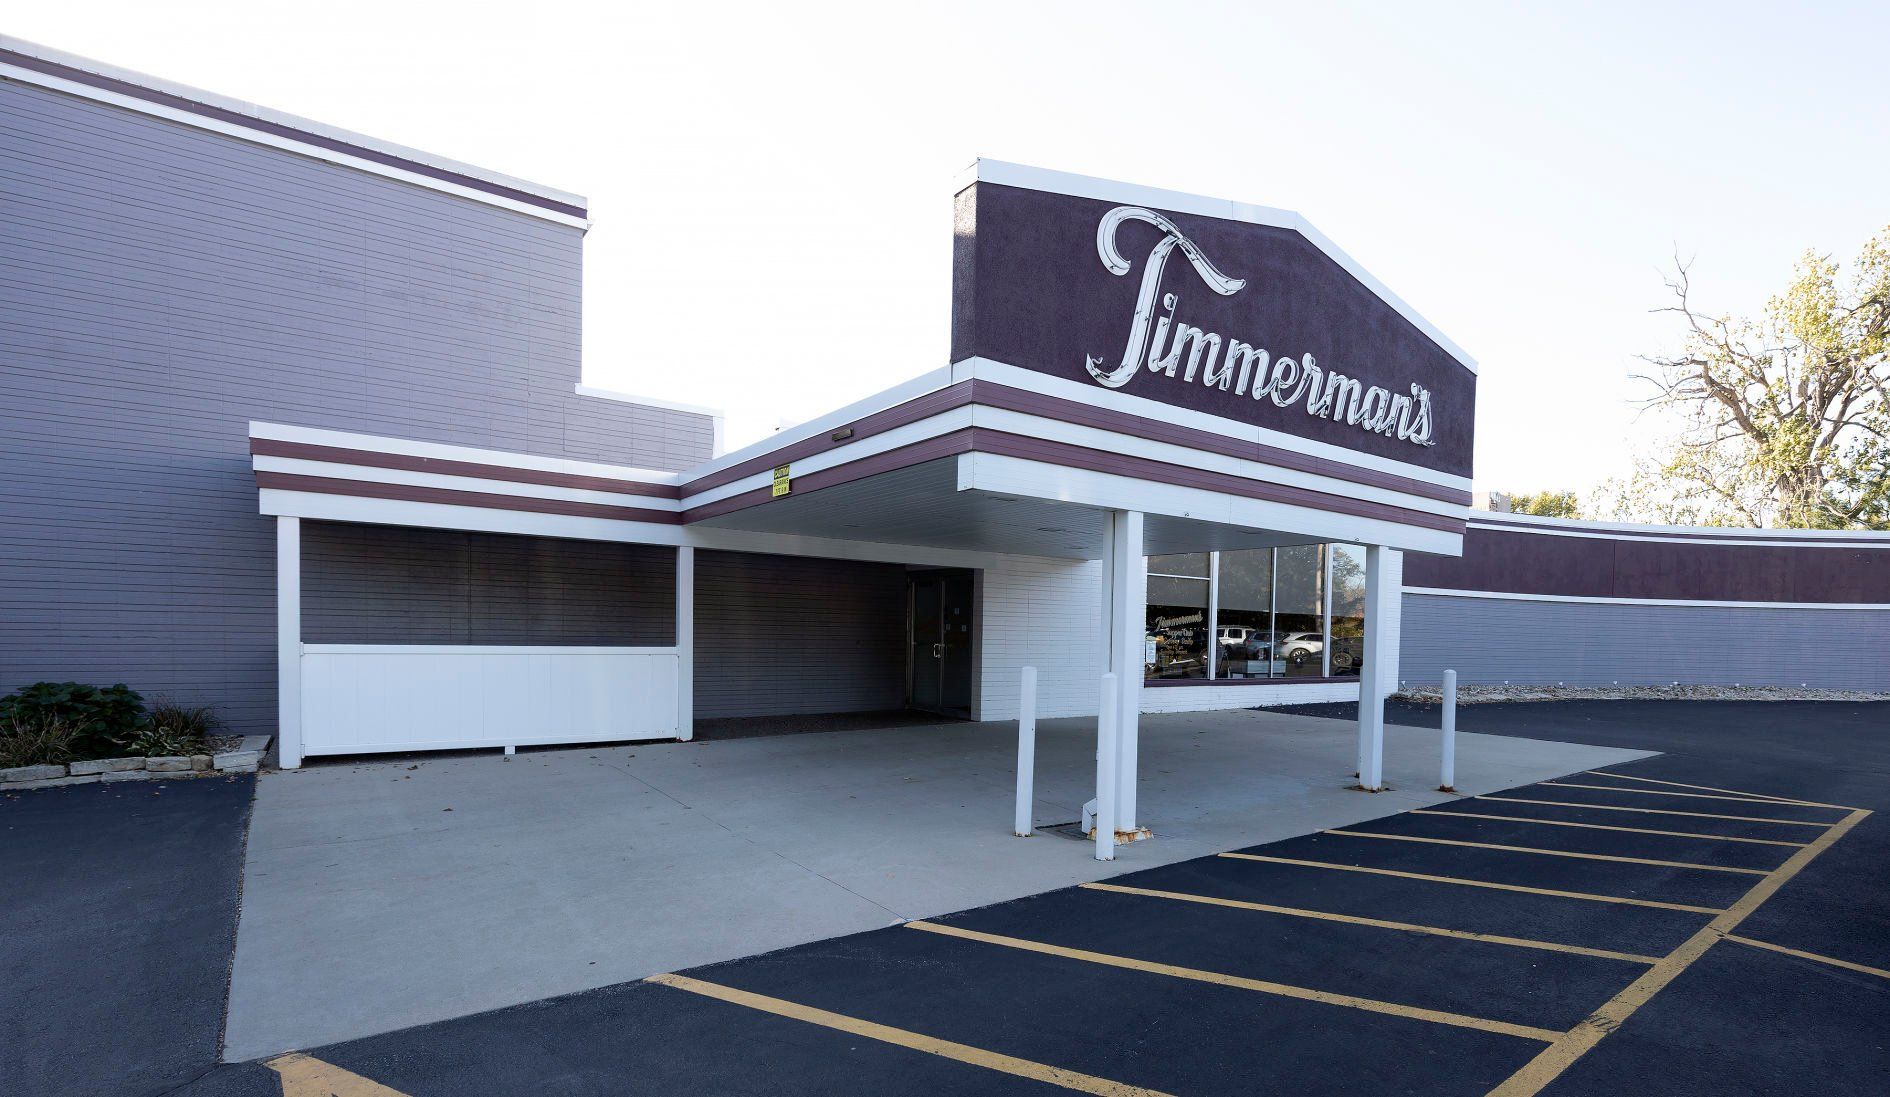 Exterior of Timmerman’s Supper Club in East Dubuque, Ill.    PHOTO CREDIT: Stephen Gassman